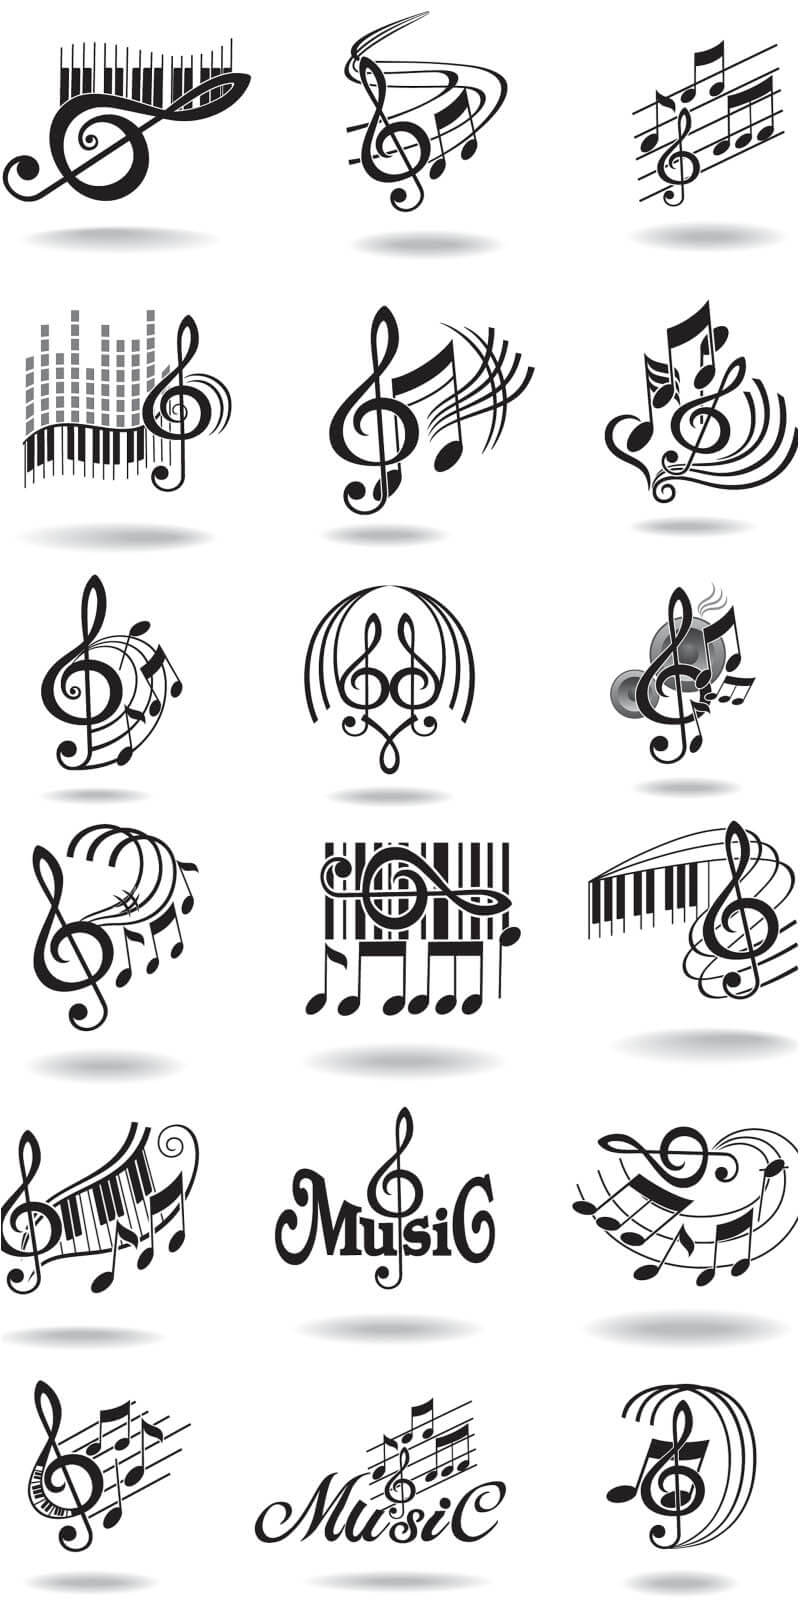 Notes, music staff and treble clef vector